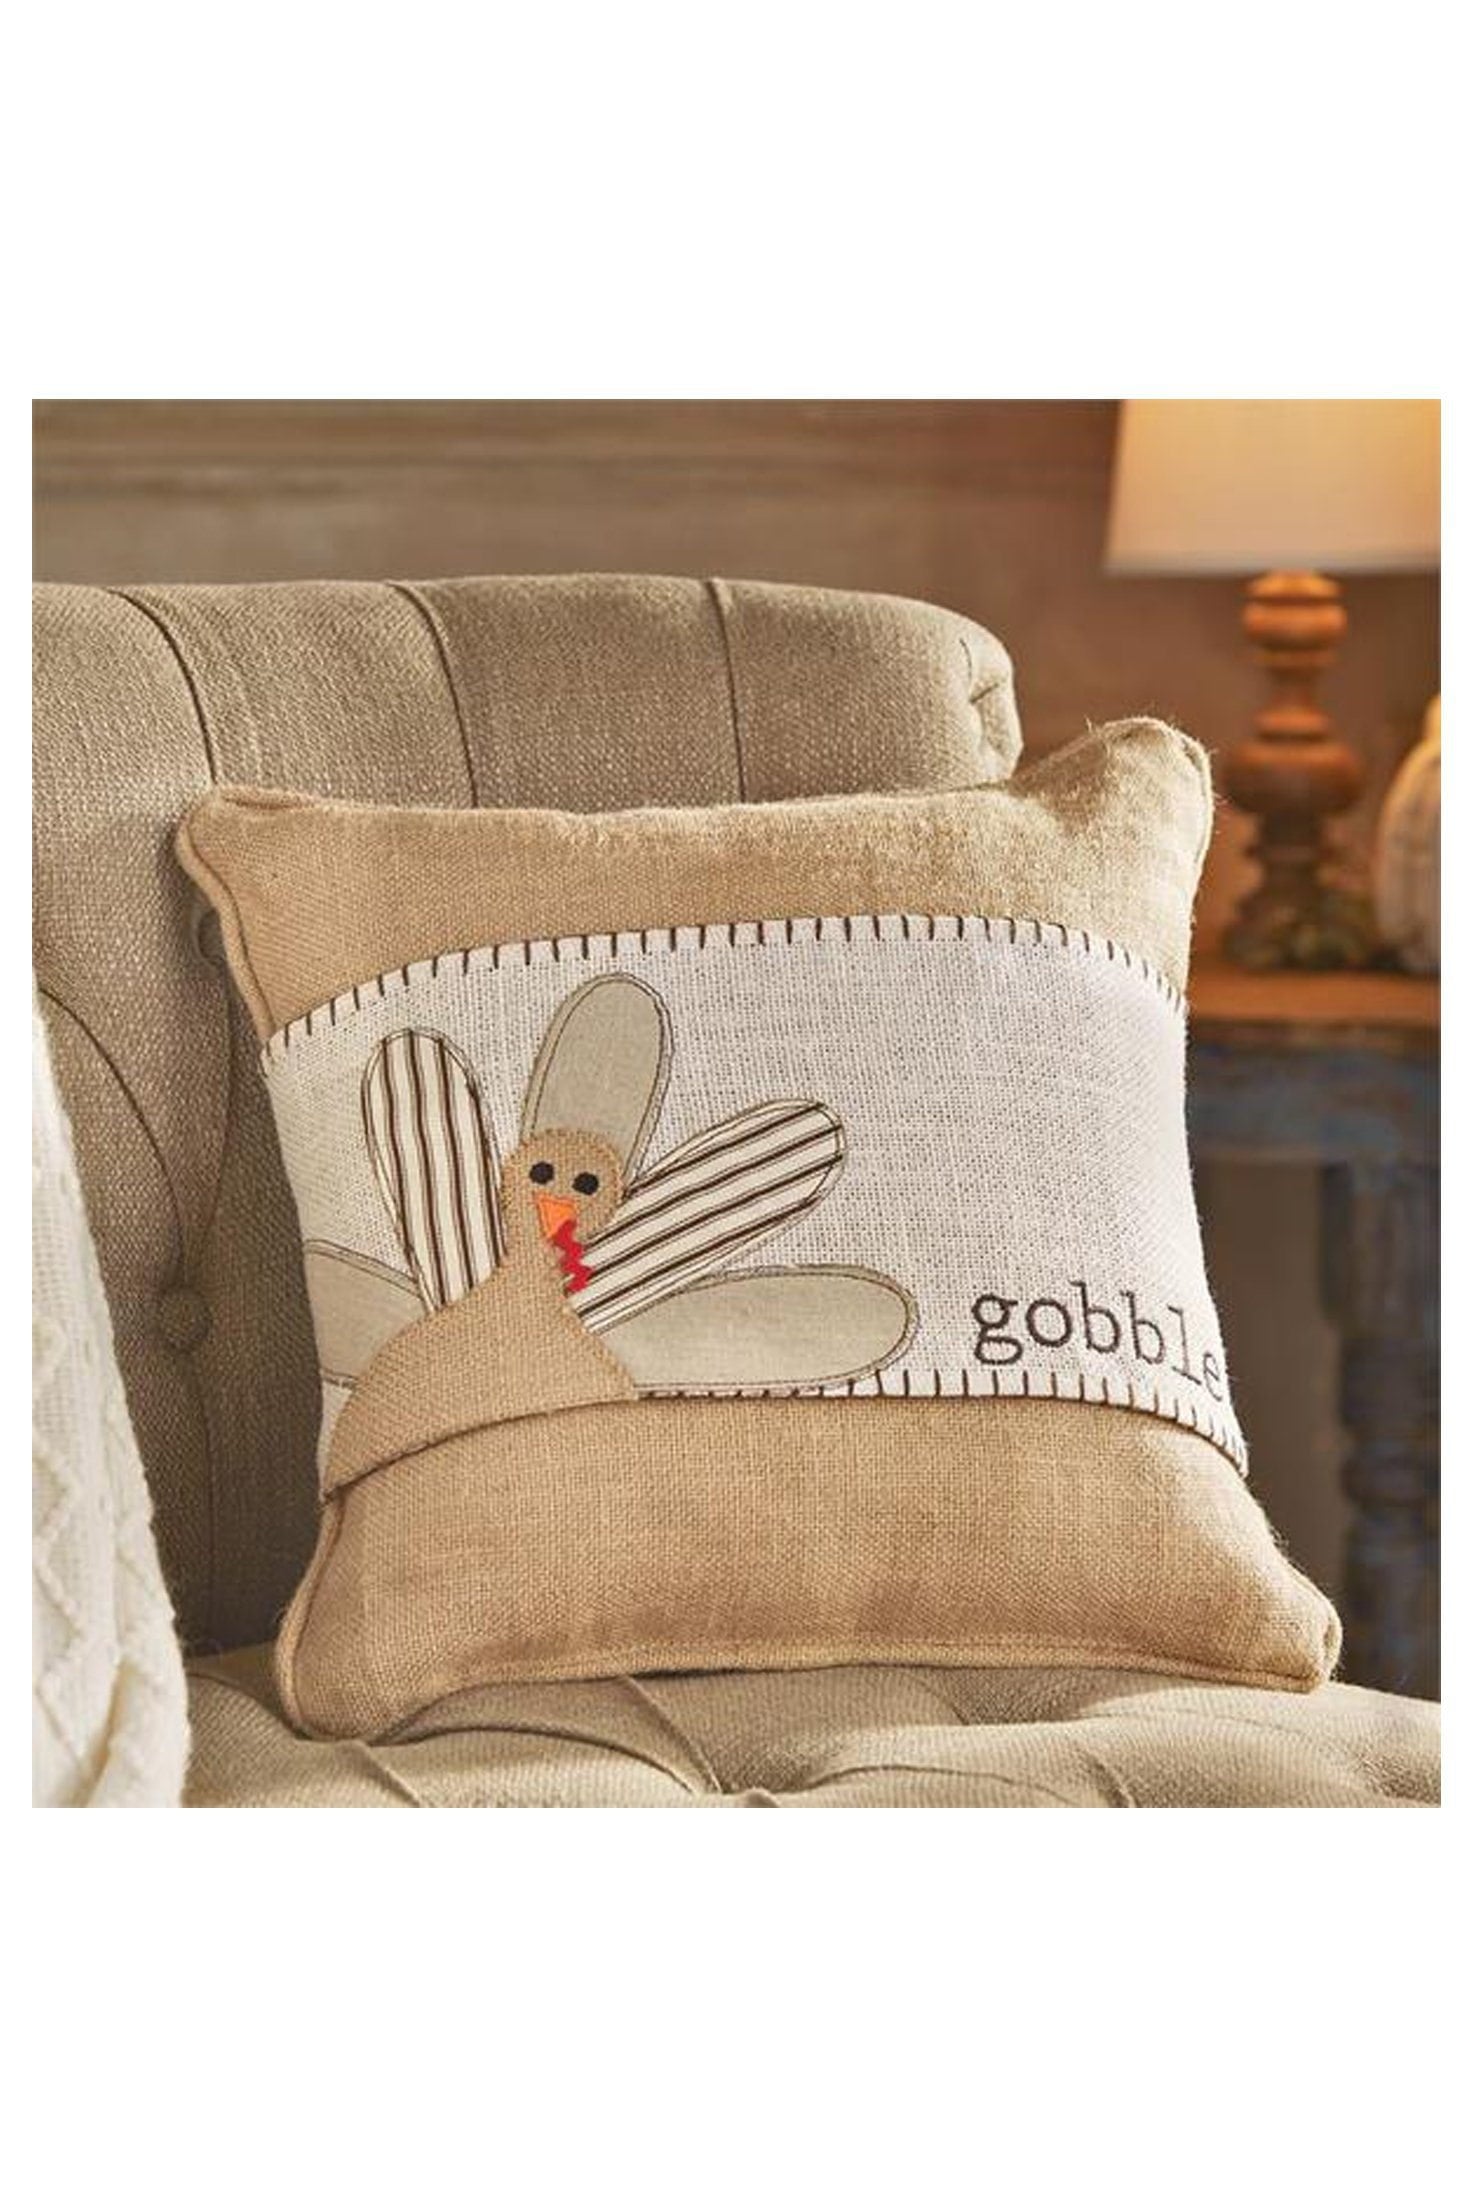 Gobble Turkey Pillow Wrap, Home, Mud Pie, - Sunny and Southern,